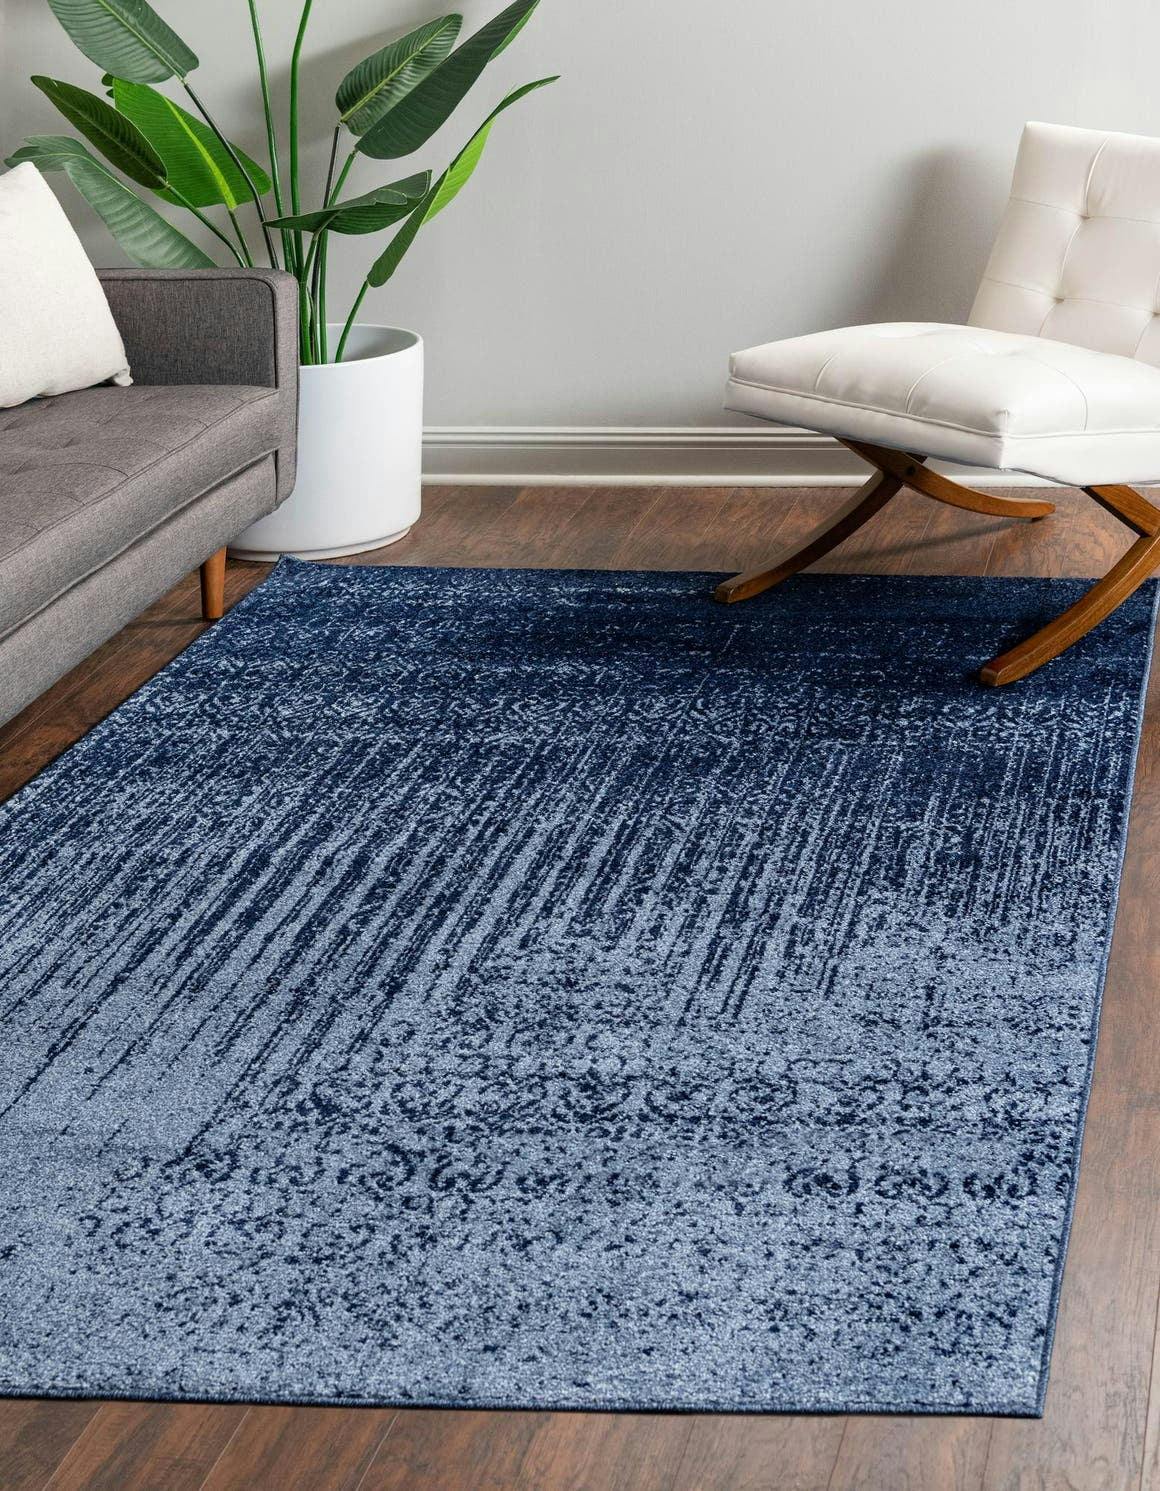 Del Mar Tufted Blue Rectangular Easy-Care Synthetic Rug